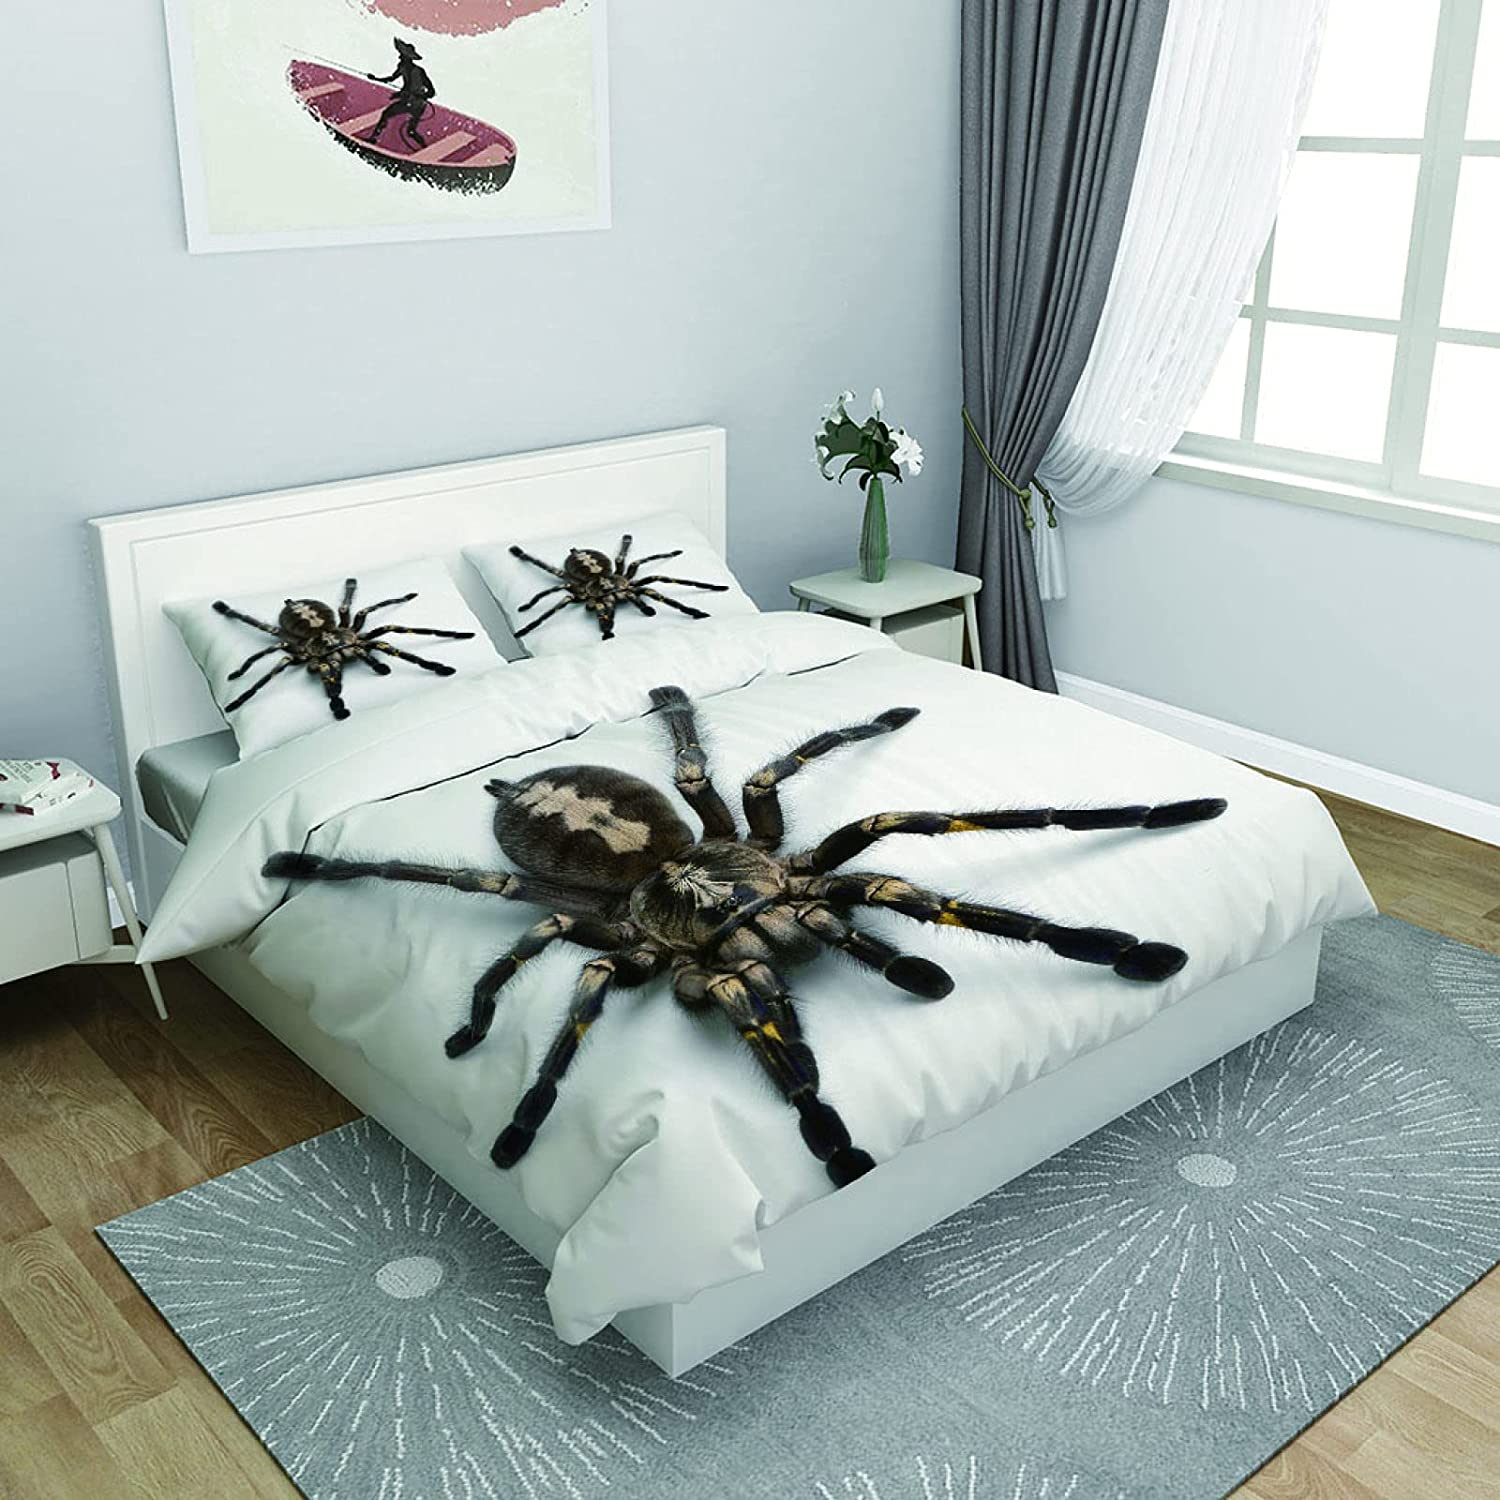 Black colored giant 3d spider with white bg bedsheet